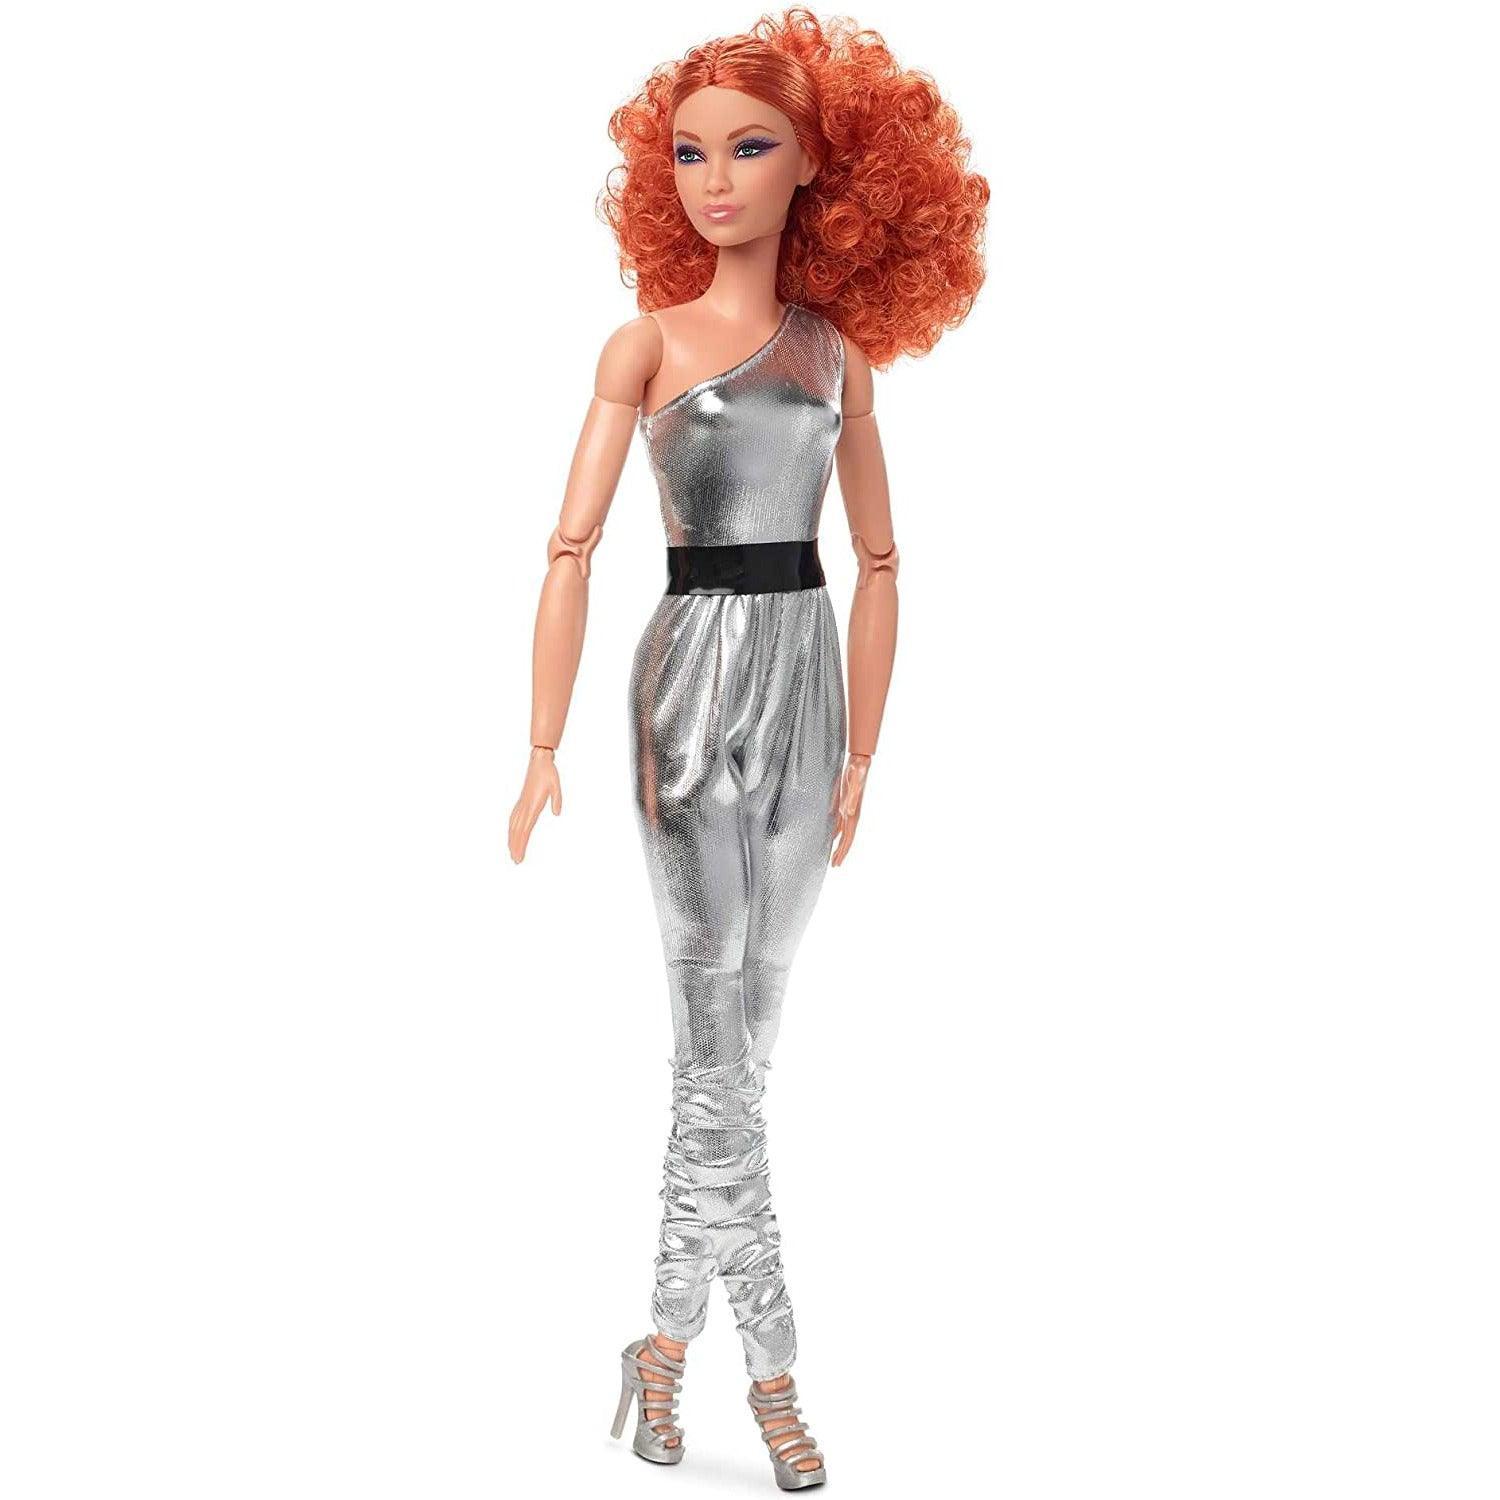 Barbie Signature Barbie Looks Doll (Red Curly Hair, Original Body Type), Fully Posable Fashion Doll - BumbleToys - 5-7 Years, Barbie, Fashion Dolls & Accessories, Girls, Pre-Order